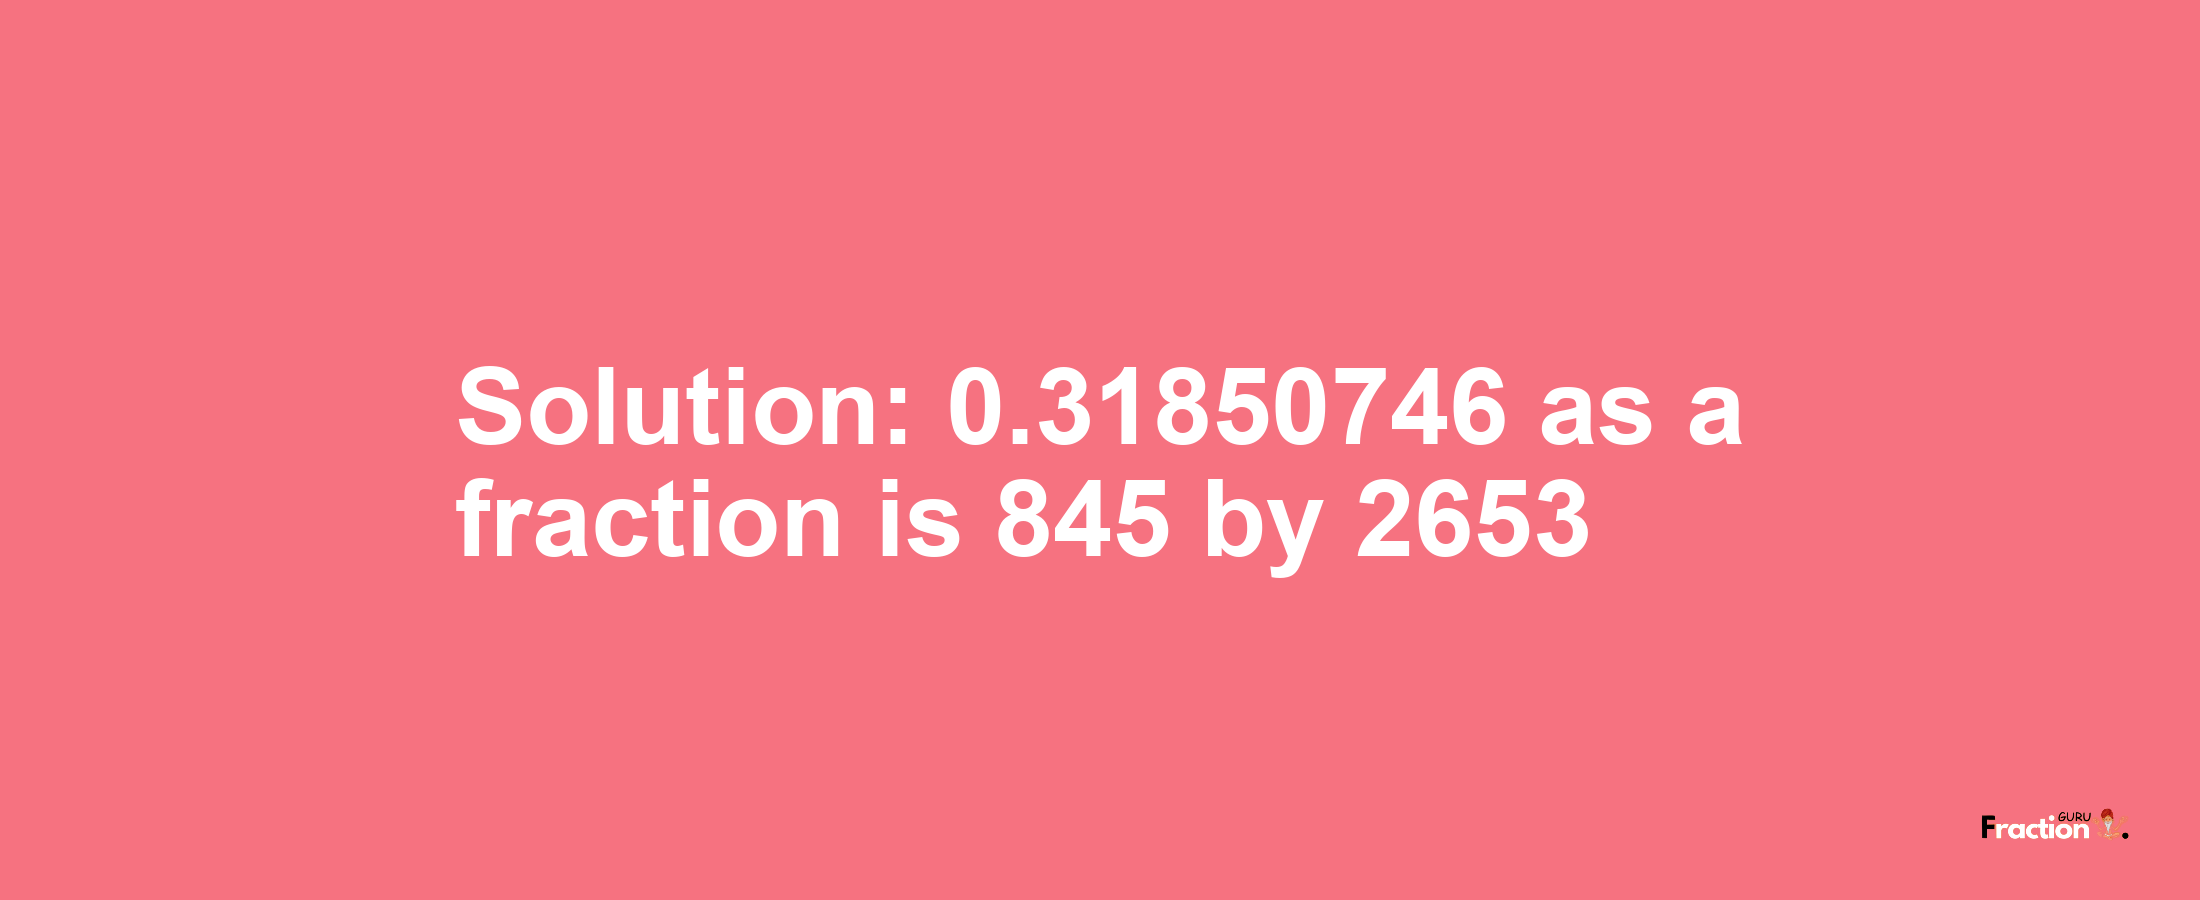 Solution:0.31850746 as a fraction is 845/2653